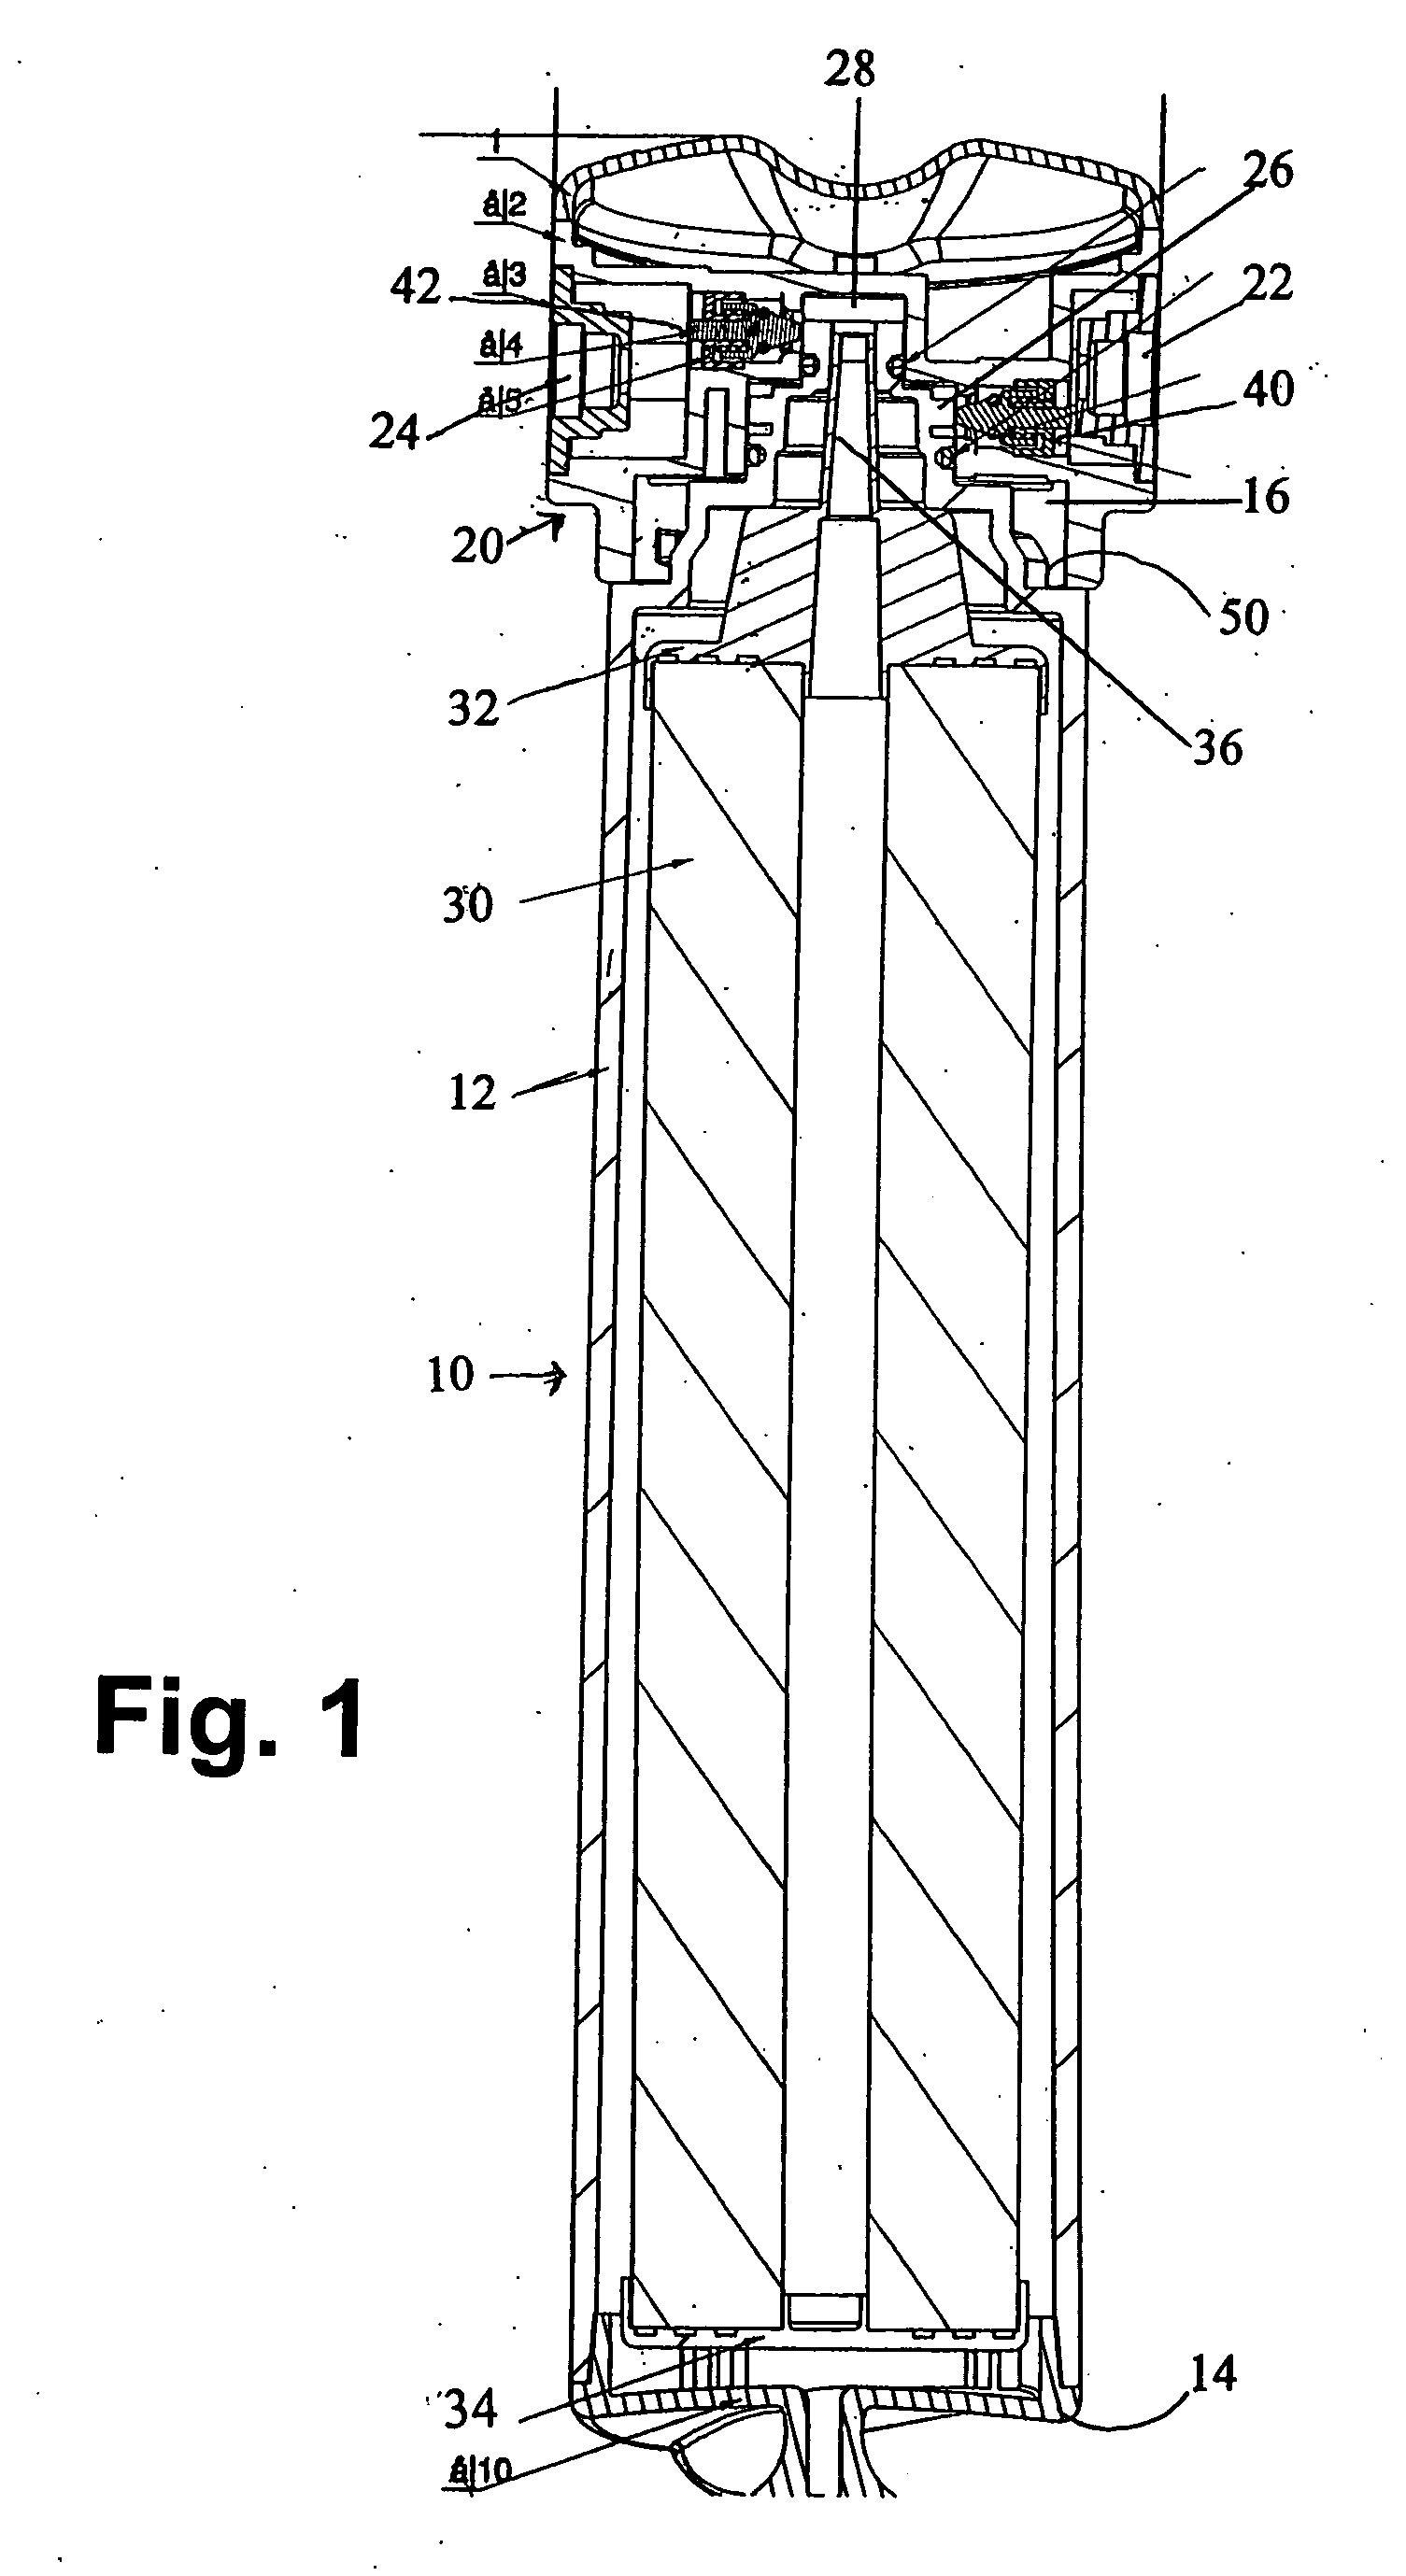 Fluid filter mounting apparatus and method